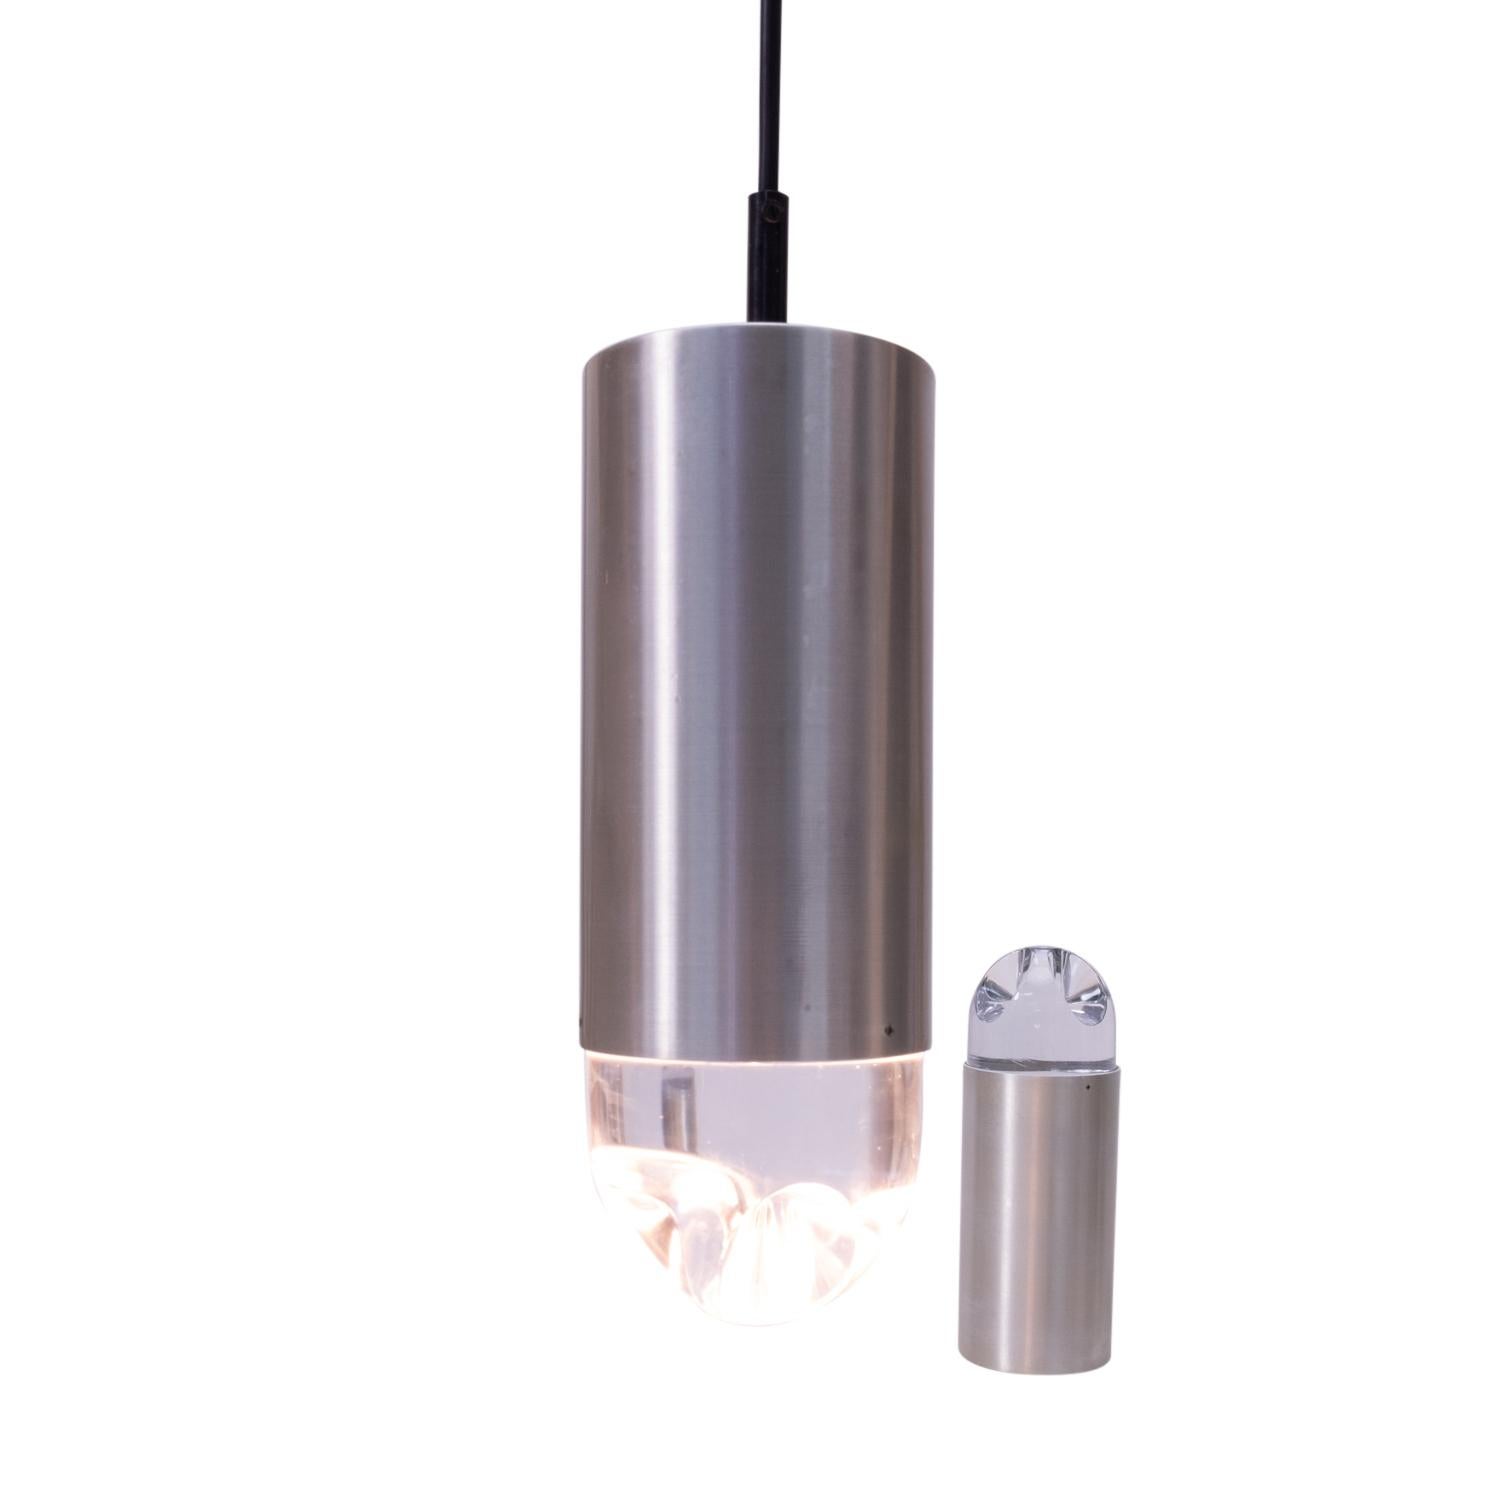 RAAK B-1105, B1106 “light shower” ceiling lamps or pendants in lightly brushed aluminum, with solid crystal top. No light source directly visible. Wiring replaced.

These lamps are a typical example of 1970s Dutch lighting, which widely used